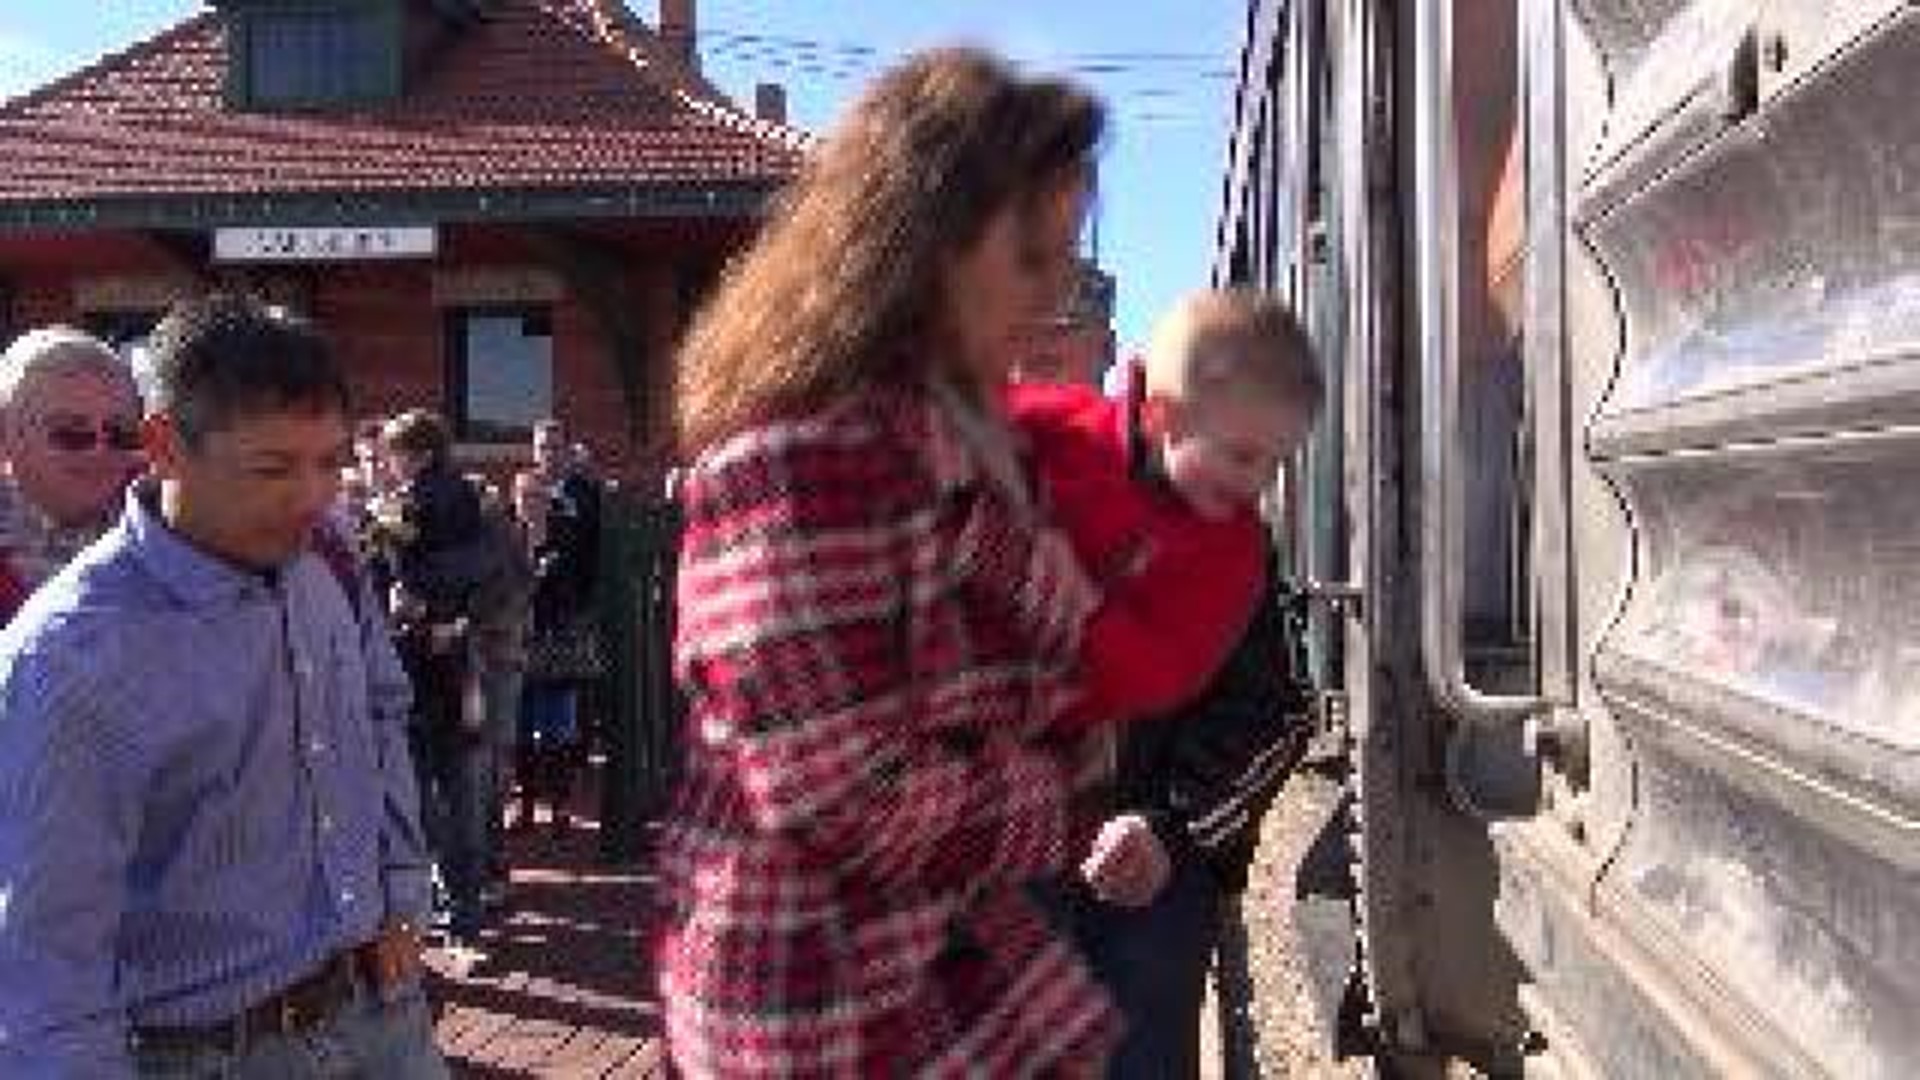 Train Ride Brings Christmas to Life for Children